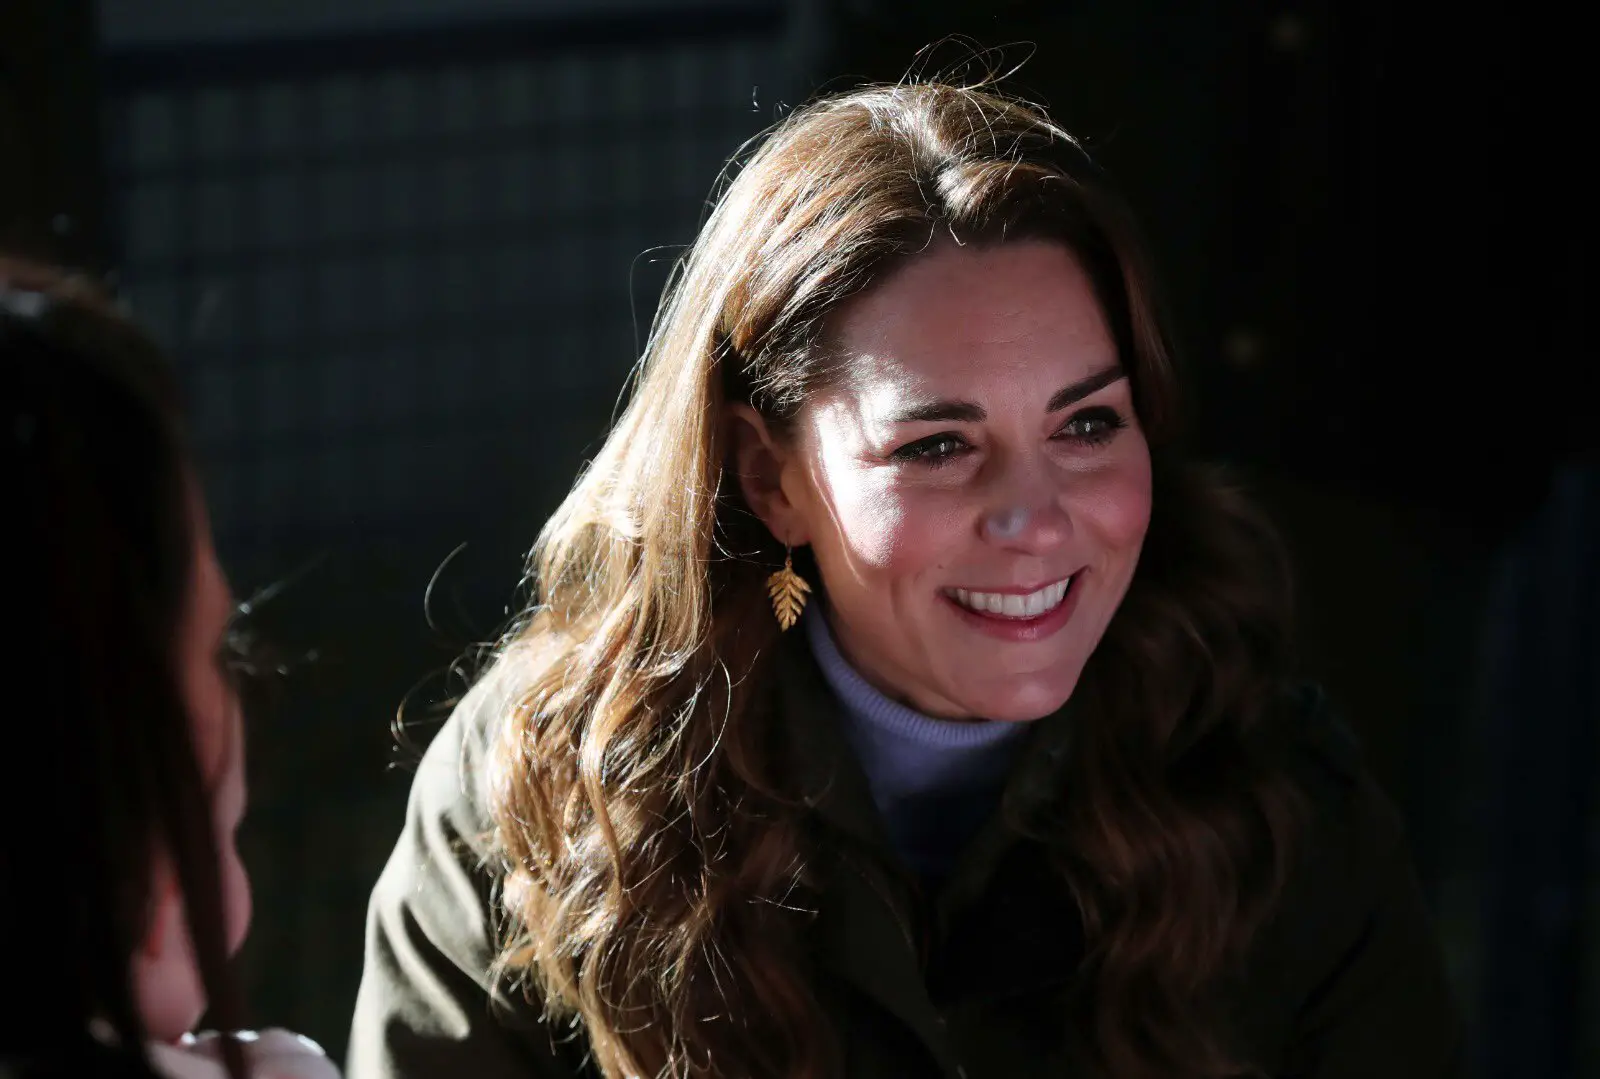 hat has struck me most is that so often the challenges people face in later life, whether mental health, homelessness or family breakdown - The Duchess of Cambridge